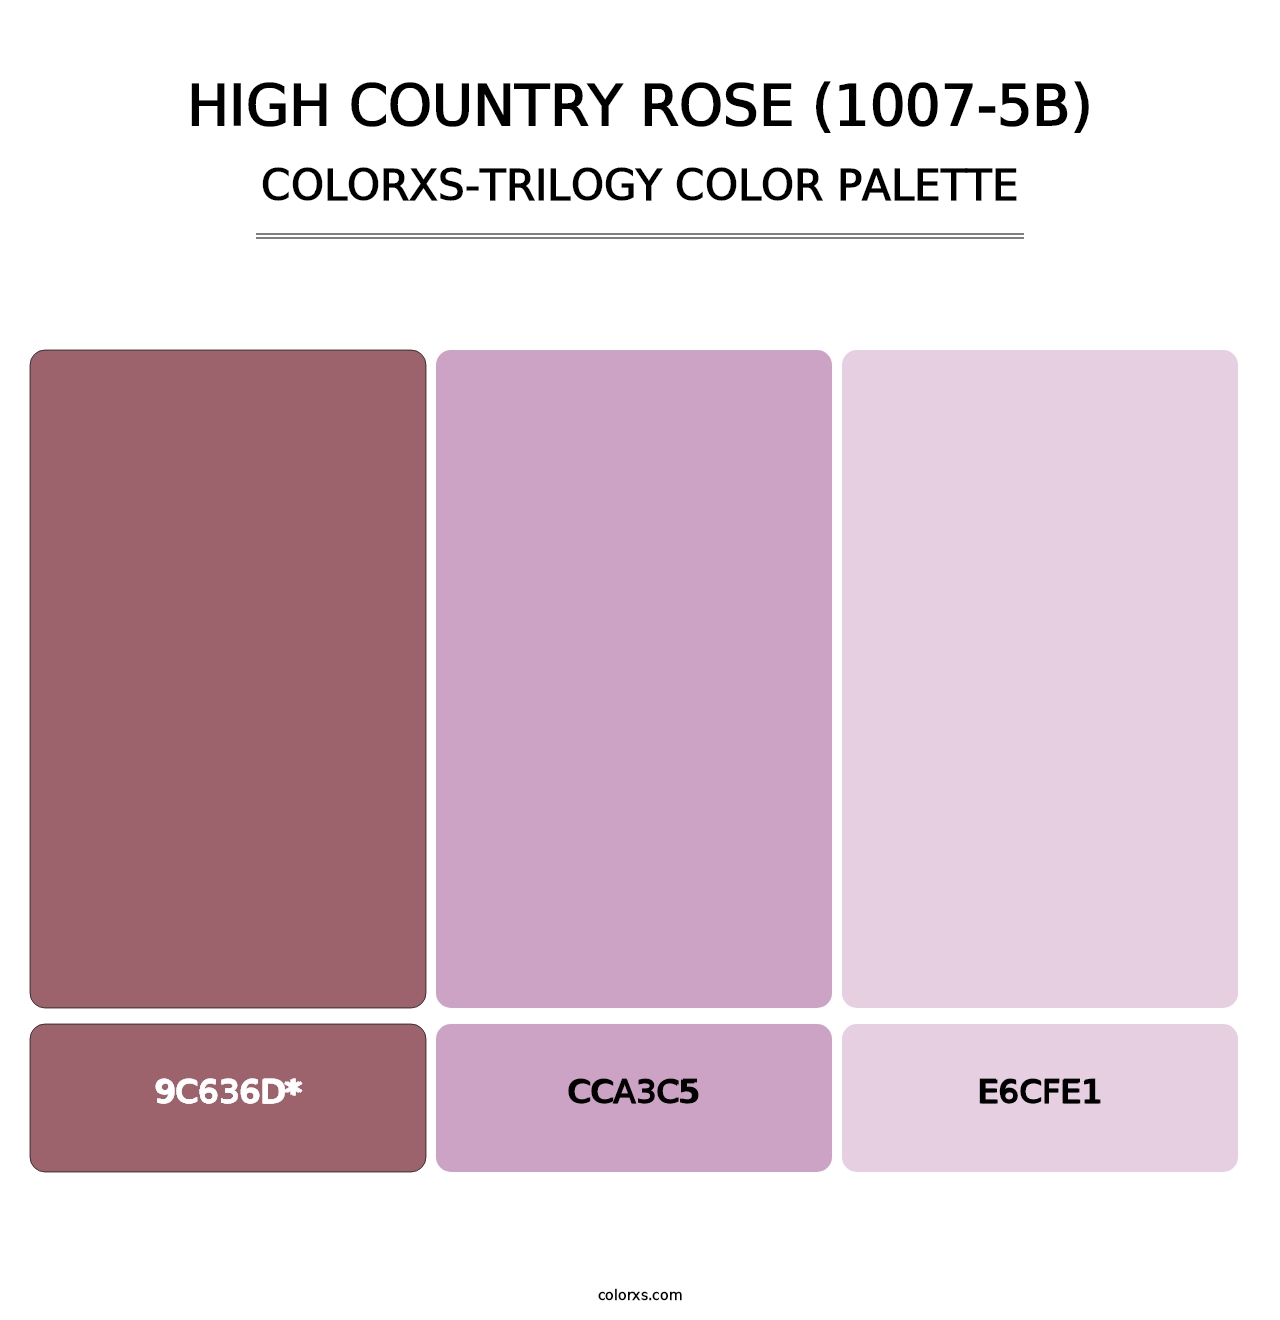 High Country Rose (1007-5B) - Colorxs Trilogy Palette